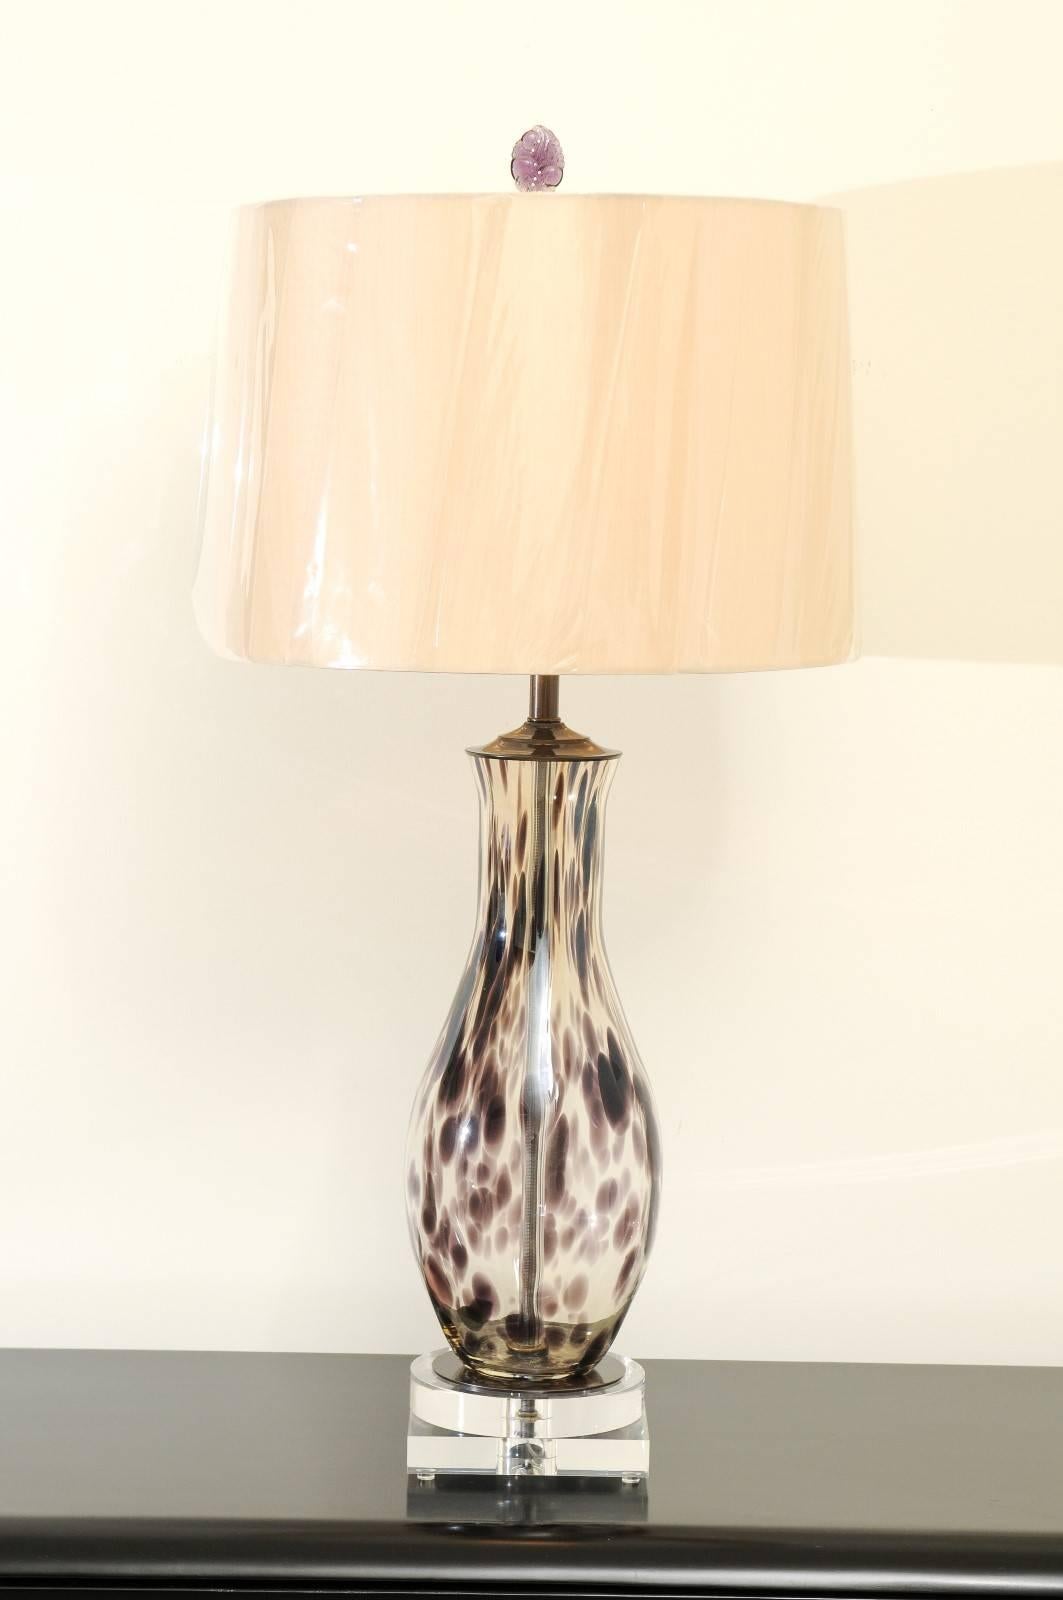 A stellar pair of blown Murano glass vases, circa 1980, as newly made custom lamps. Heavy, beautiful form with stunning charcoal spotting. Custom built using components of only the finest quality. Exceptional jewelry! Excellent restored condition.